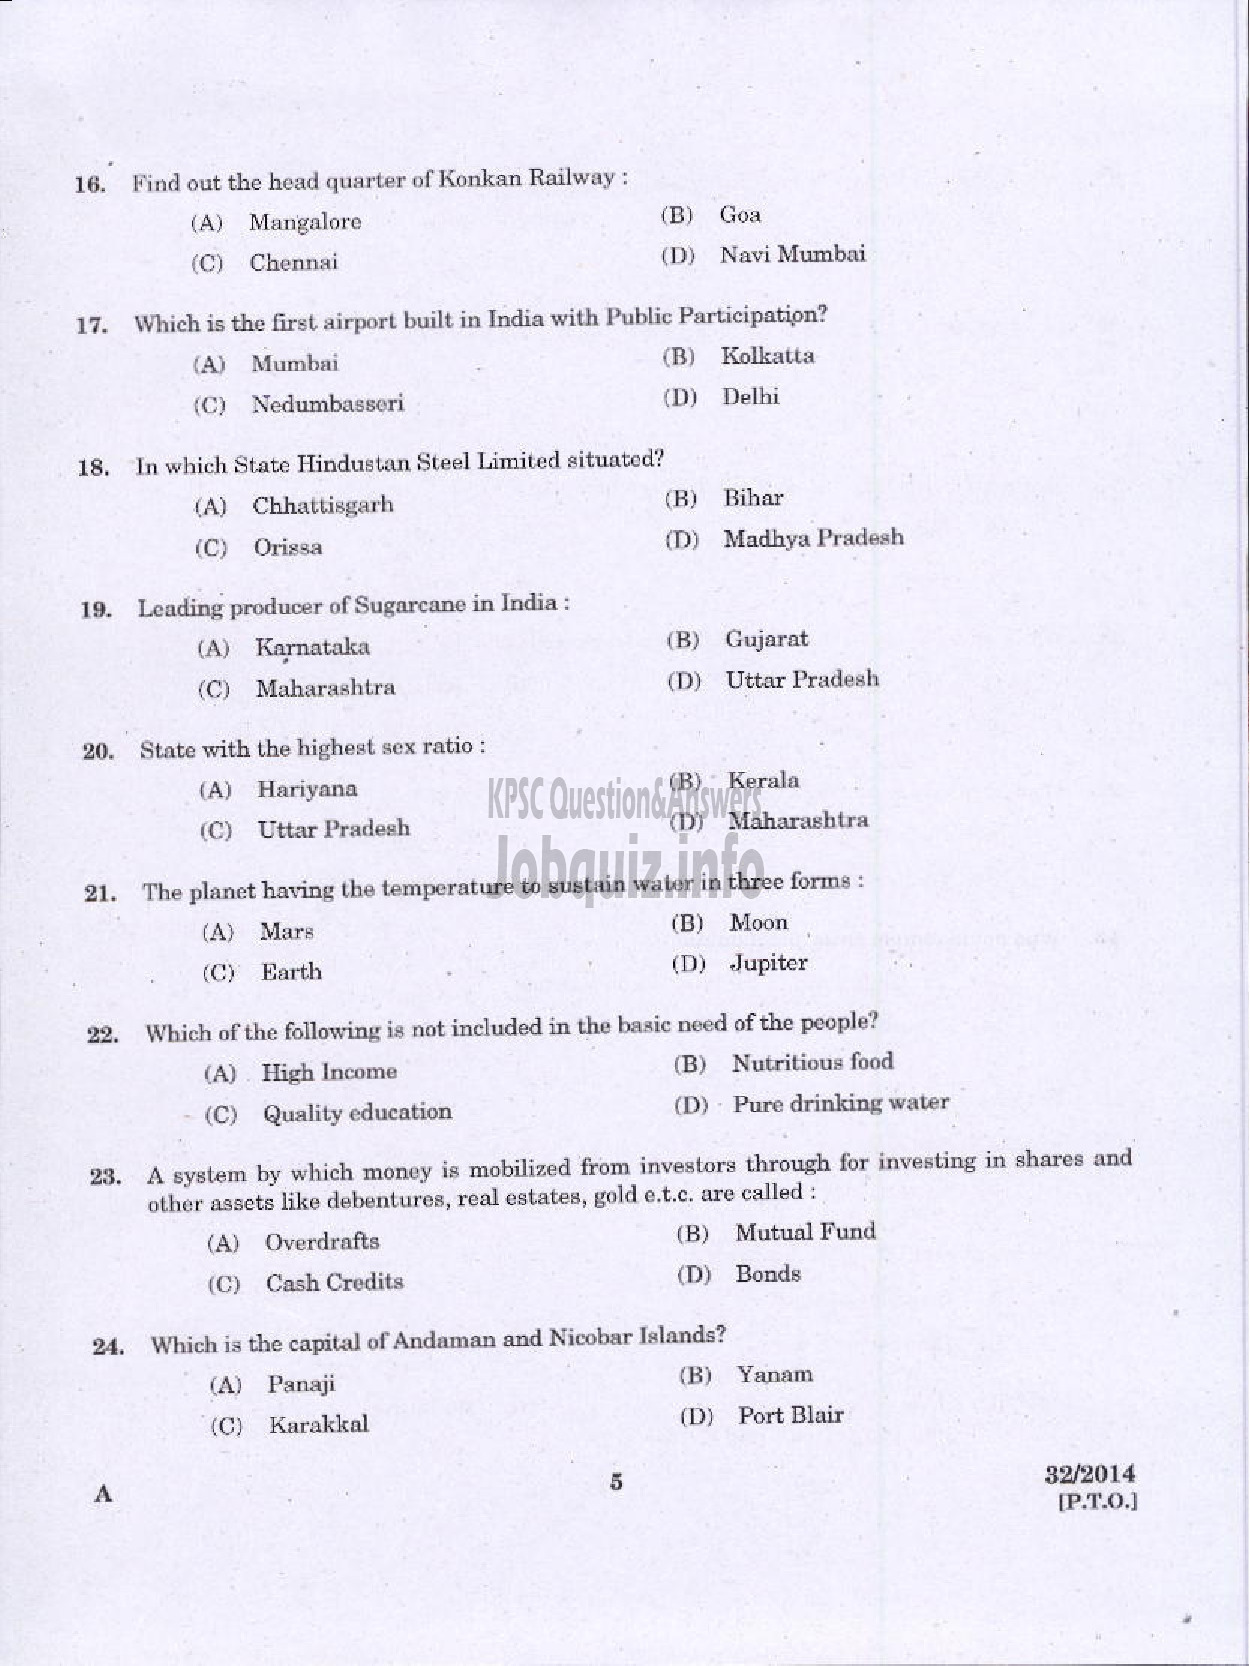 Kerala PSC Question Paper - LOWER DIVISION TYPIST NCA VARIOUS GOVERNMENT OWNED COMPANIES IDKY-3